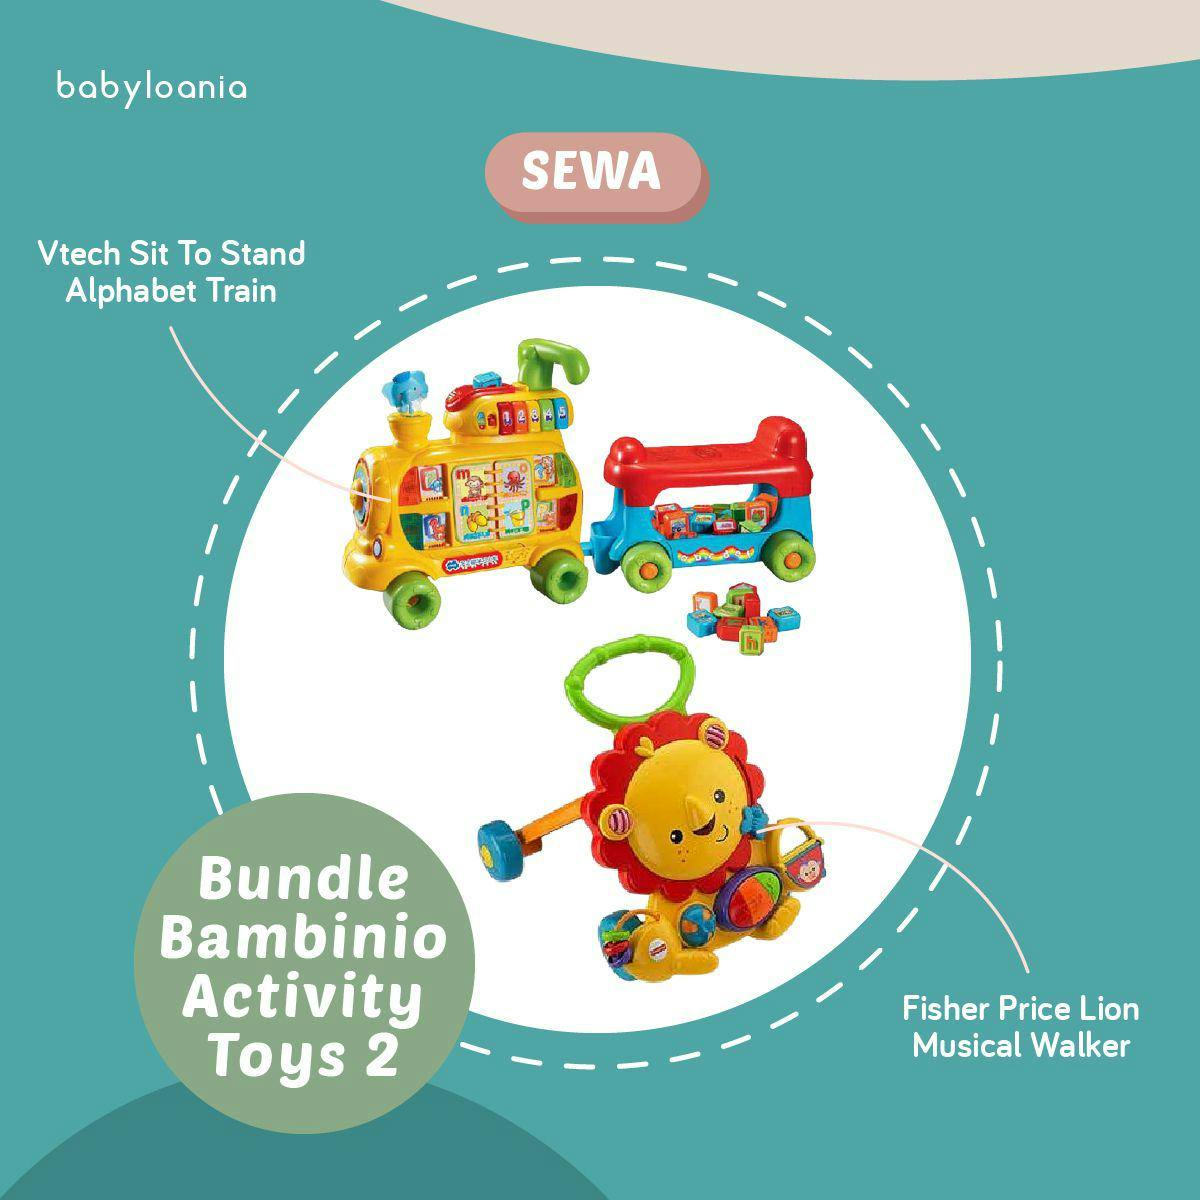 Bambinio Activity Toys 2 (Fisher Price Lion Musical Walker + Vtech Sit To Stand Alphabet Train)